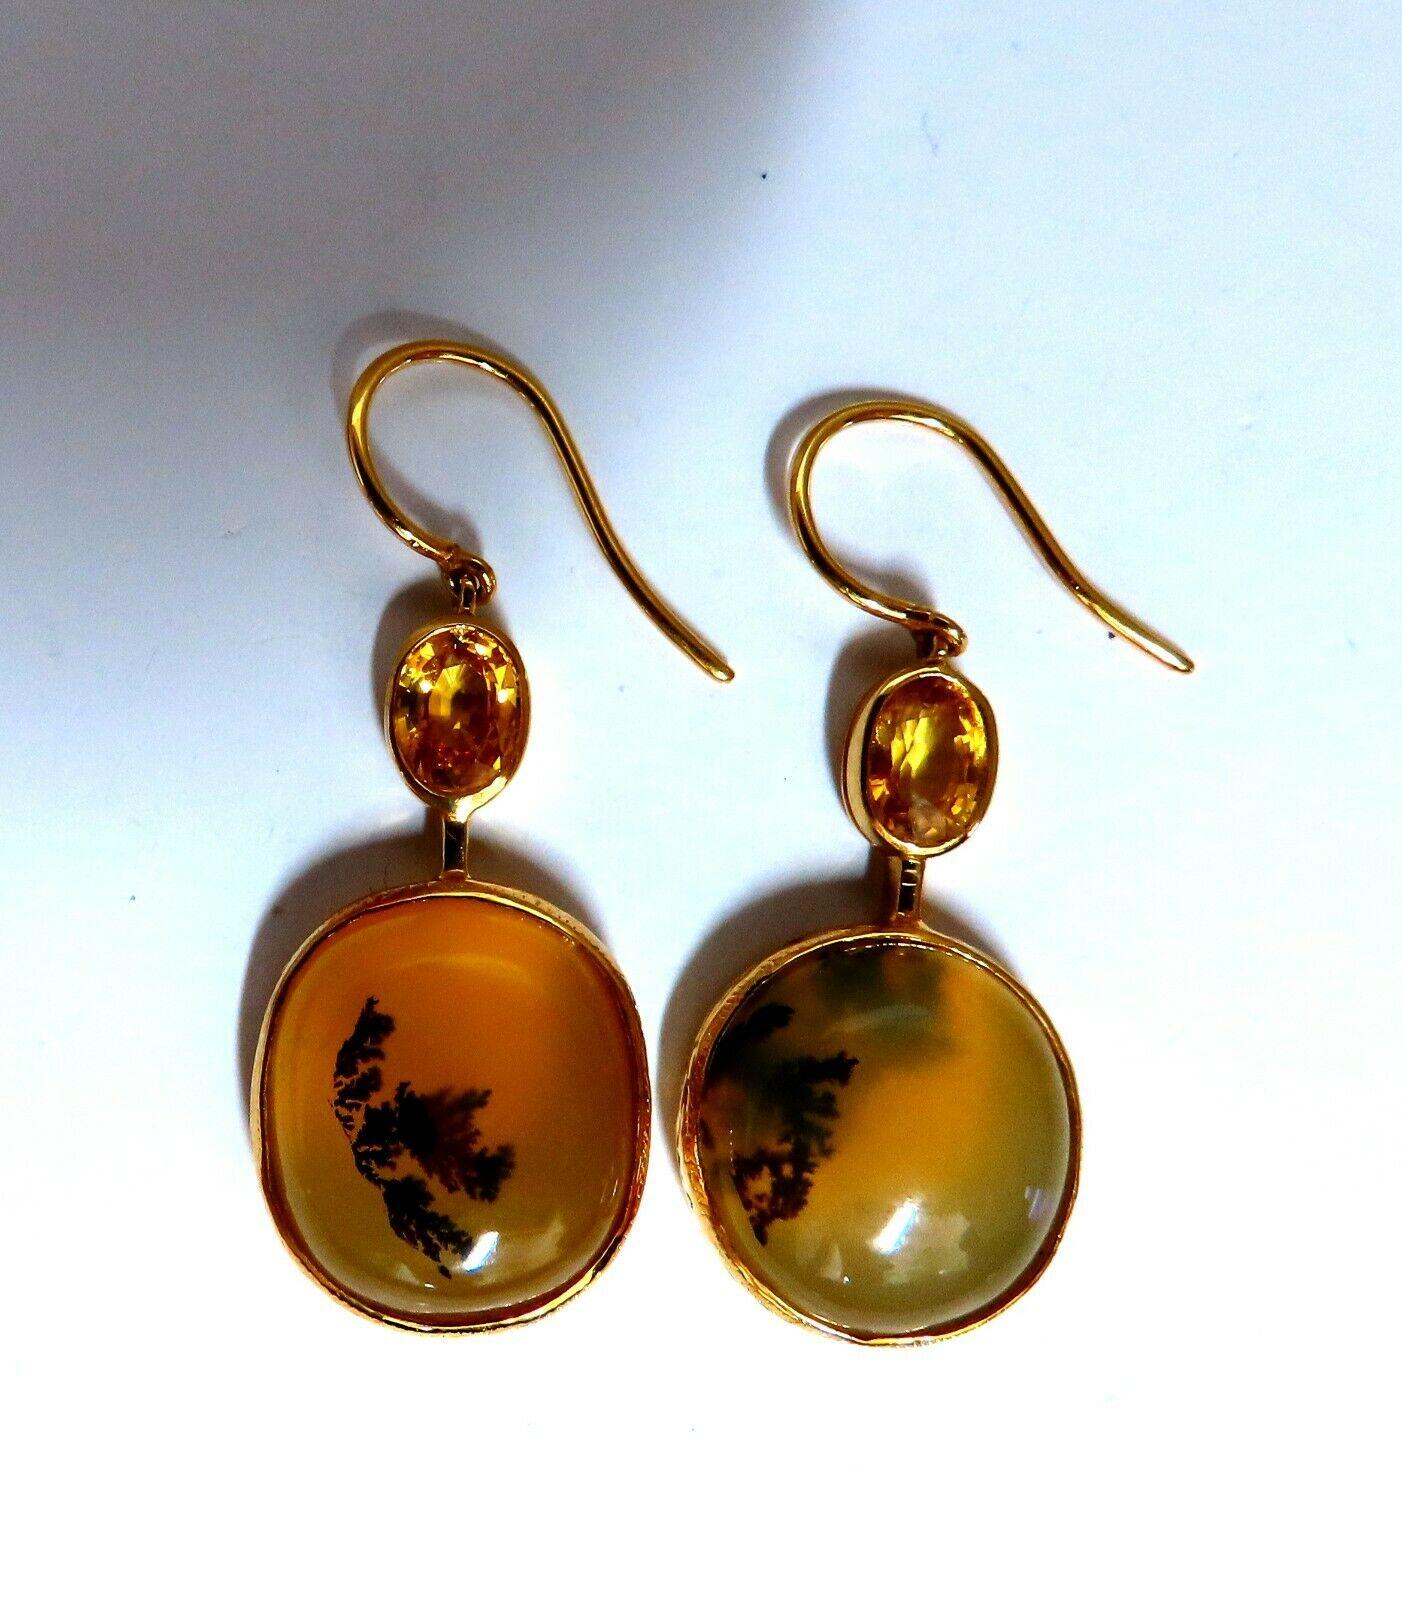 natural yellow sapphire earrings